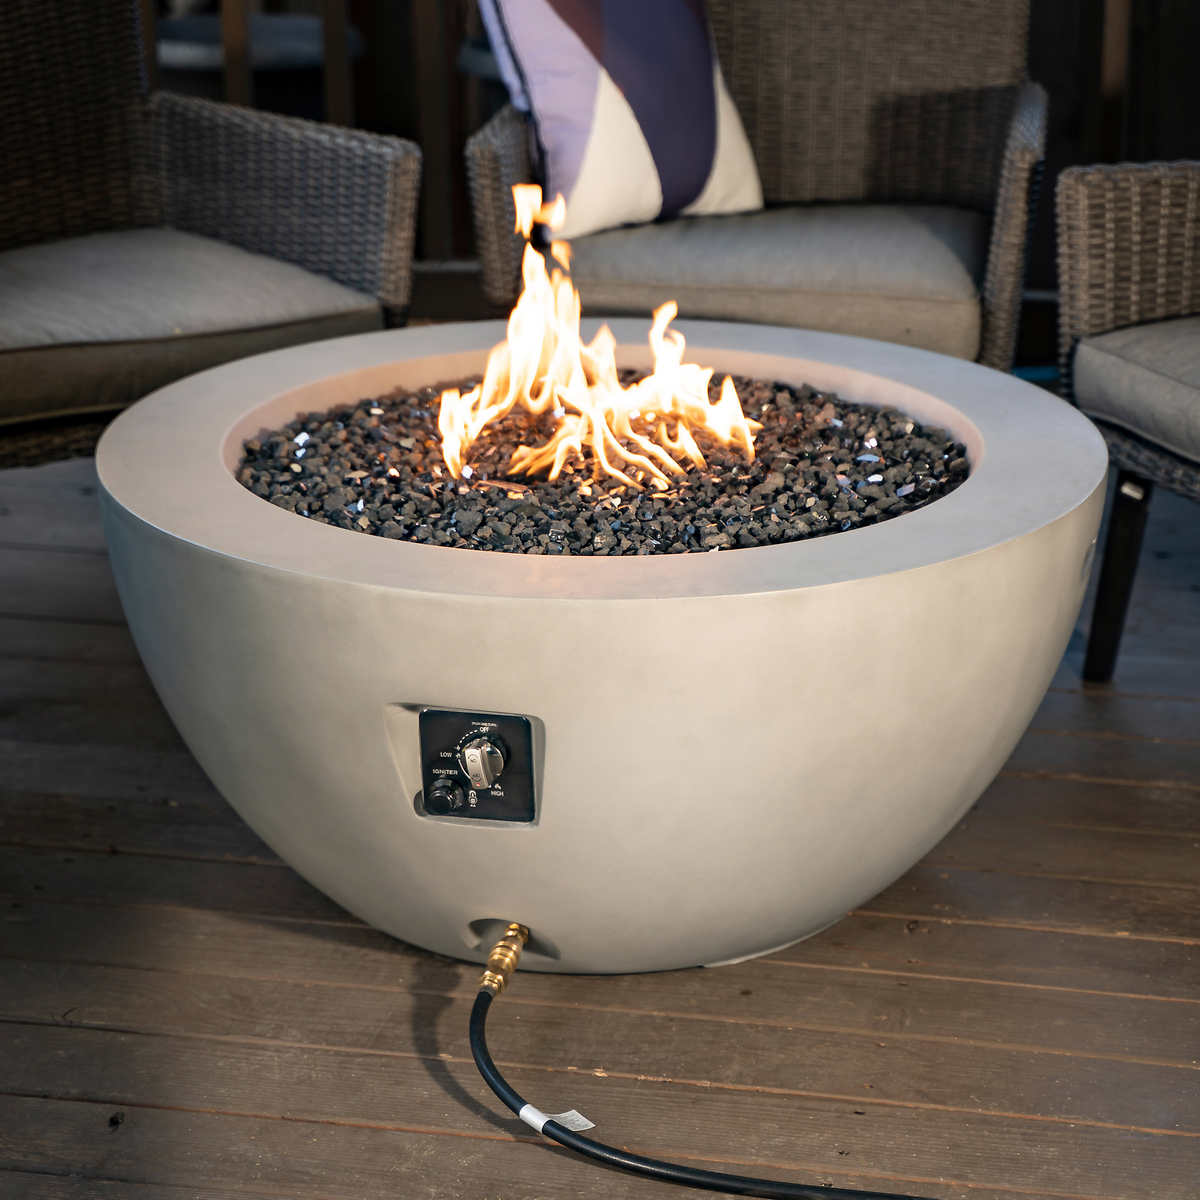 Faux Concrete Gas Fire Pit Costco, How To Make Fire Pit Glass